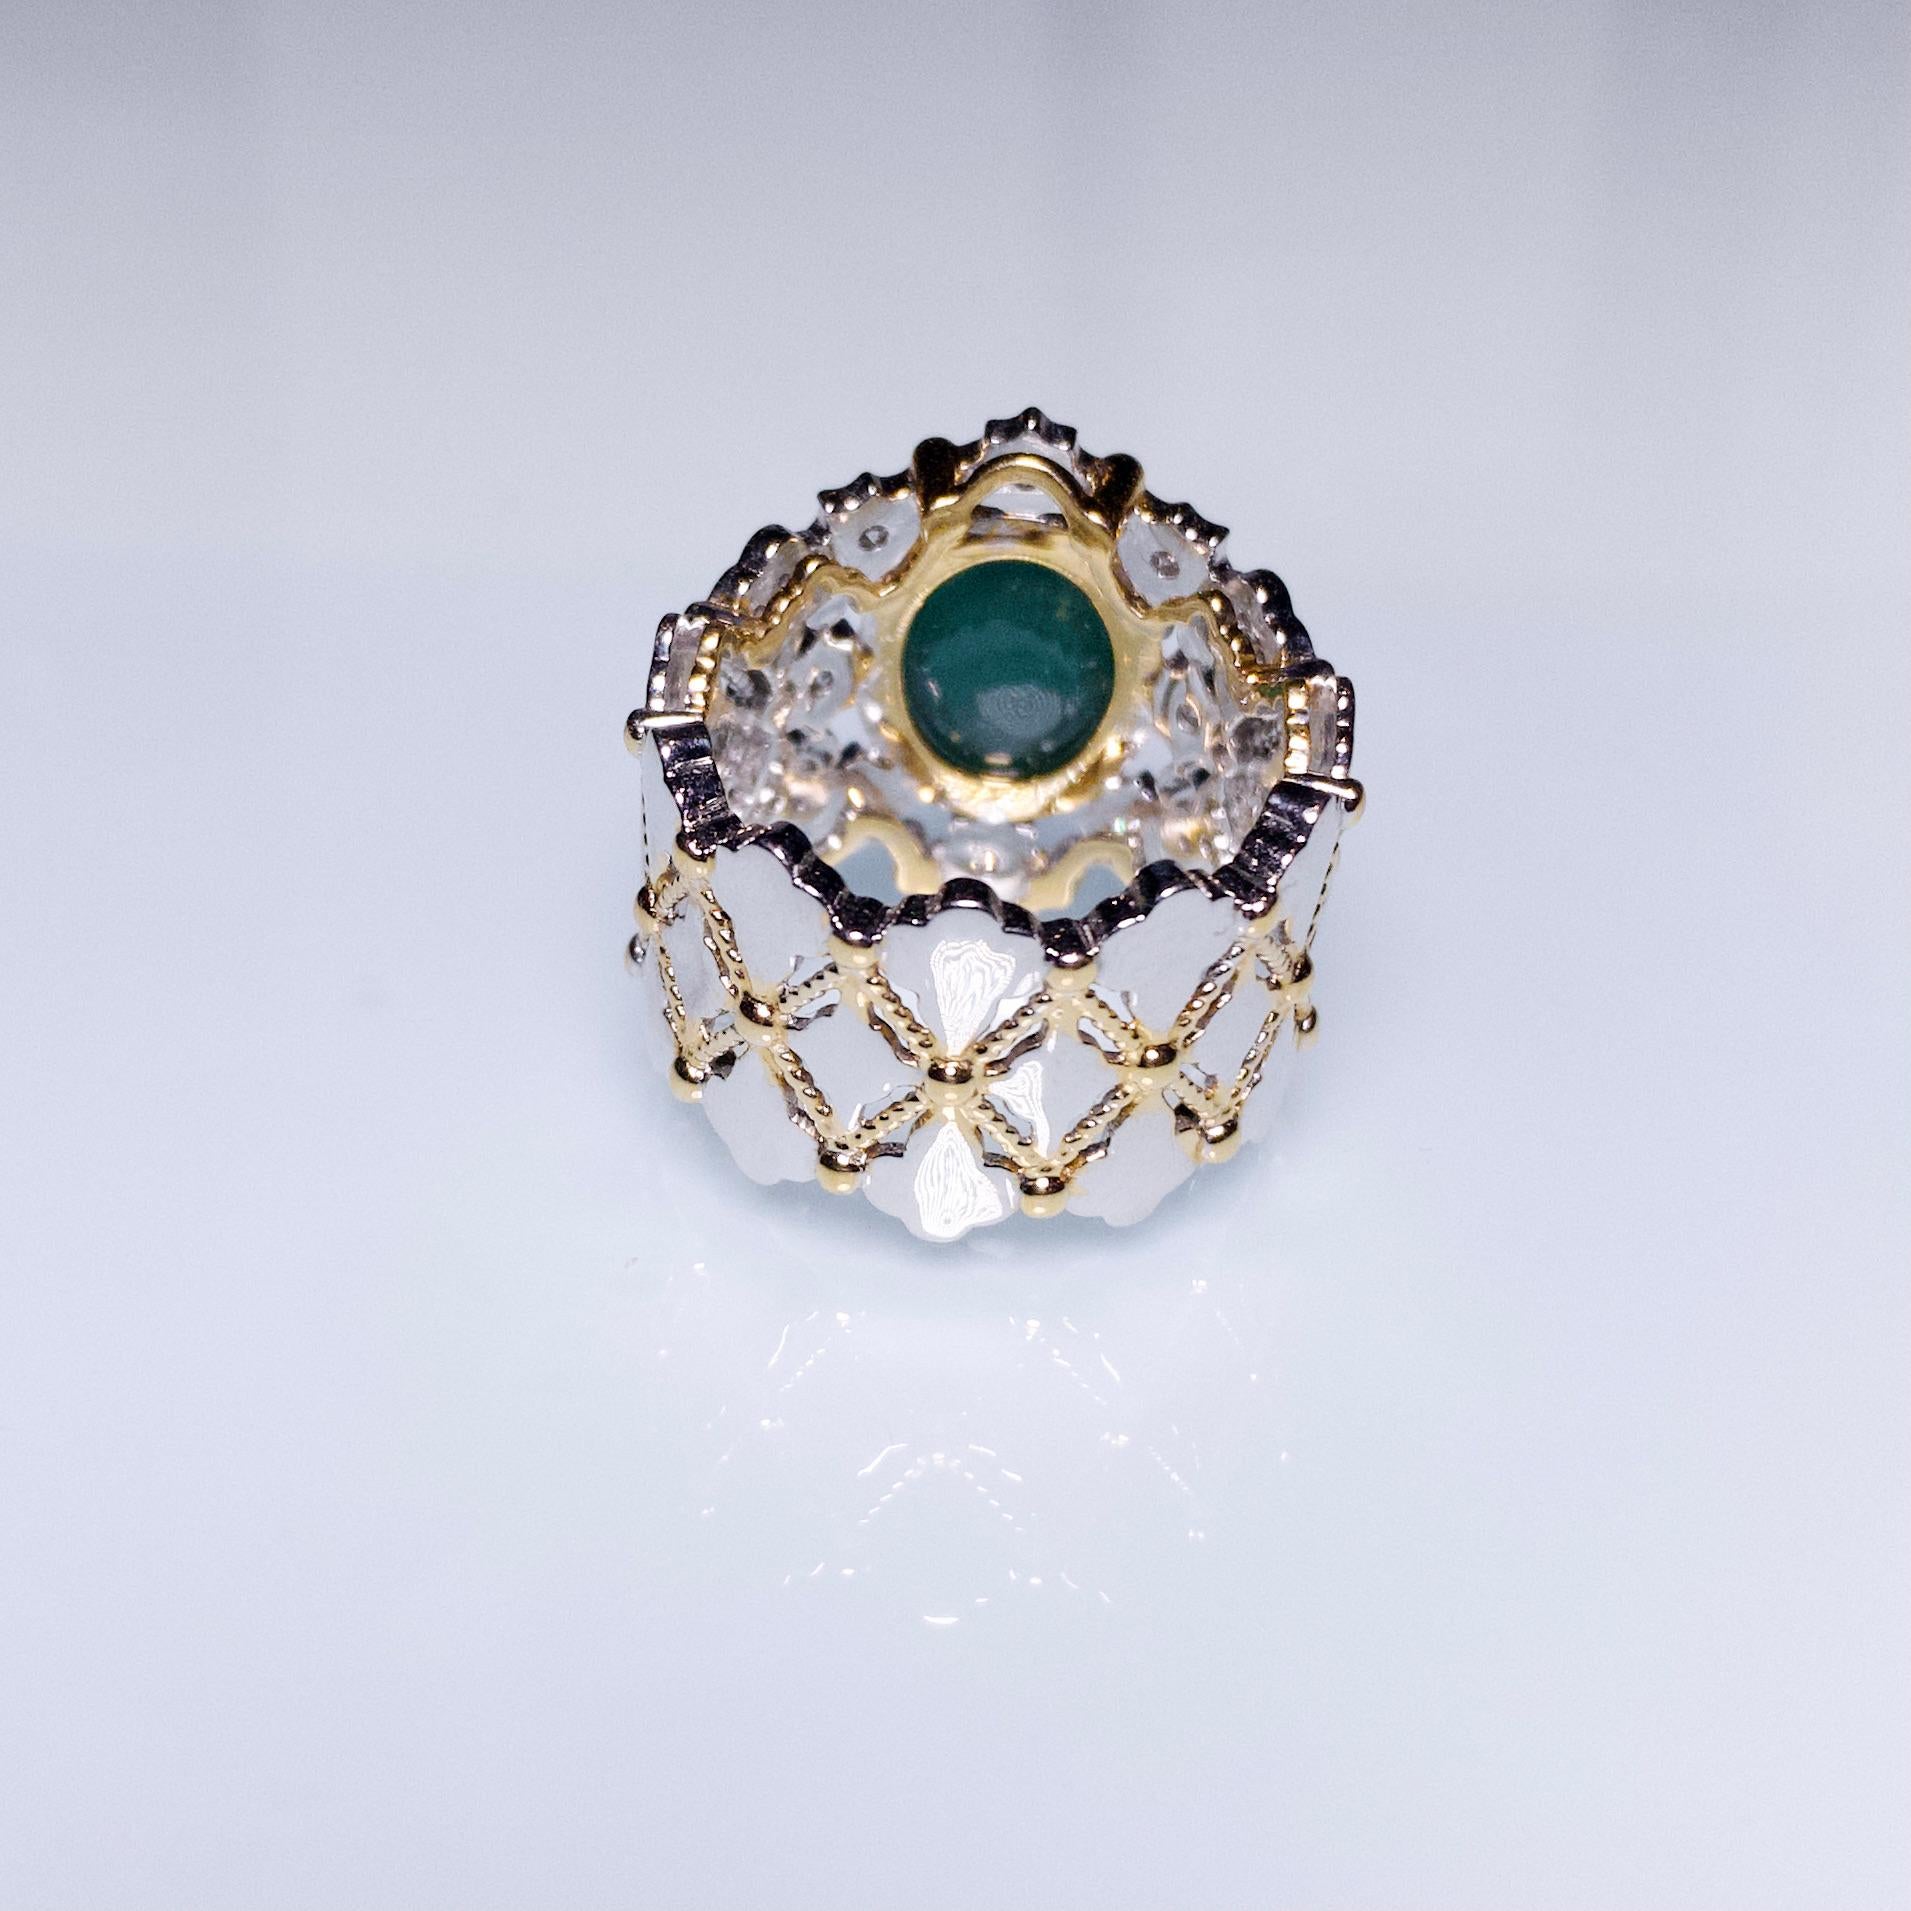 Cabochon 3.95 Ct Vivid Green Emerald and Diamond Ring in 18k Yellow and White Gold